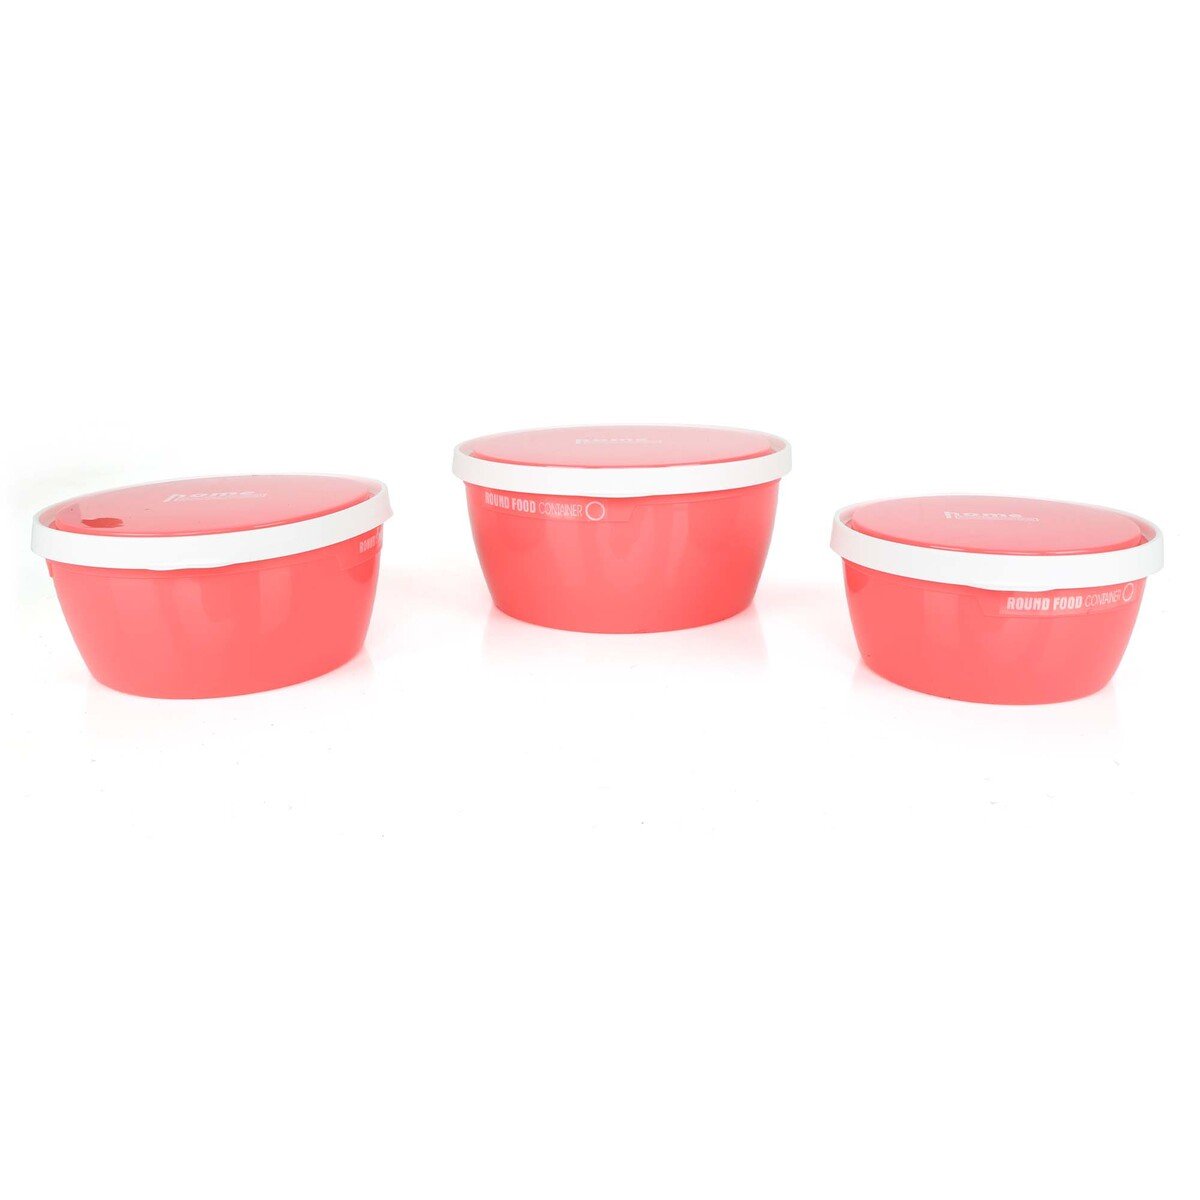 Home Food Containers 3pcs Set 8109